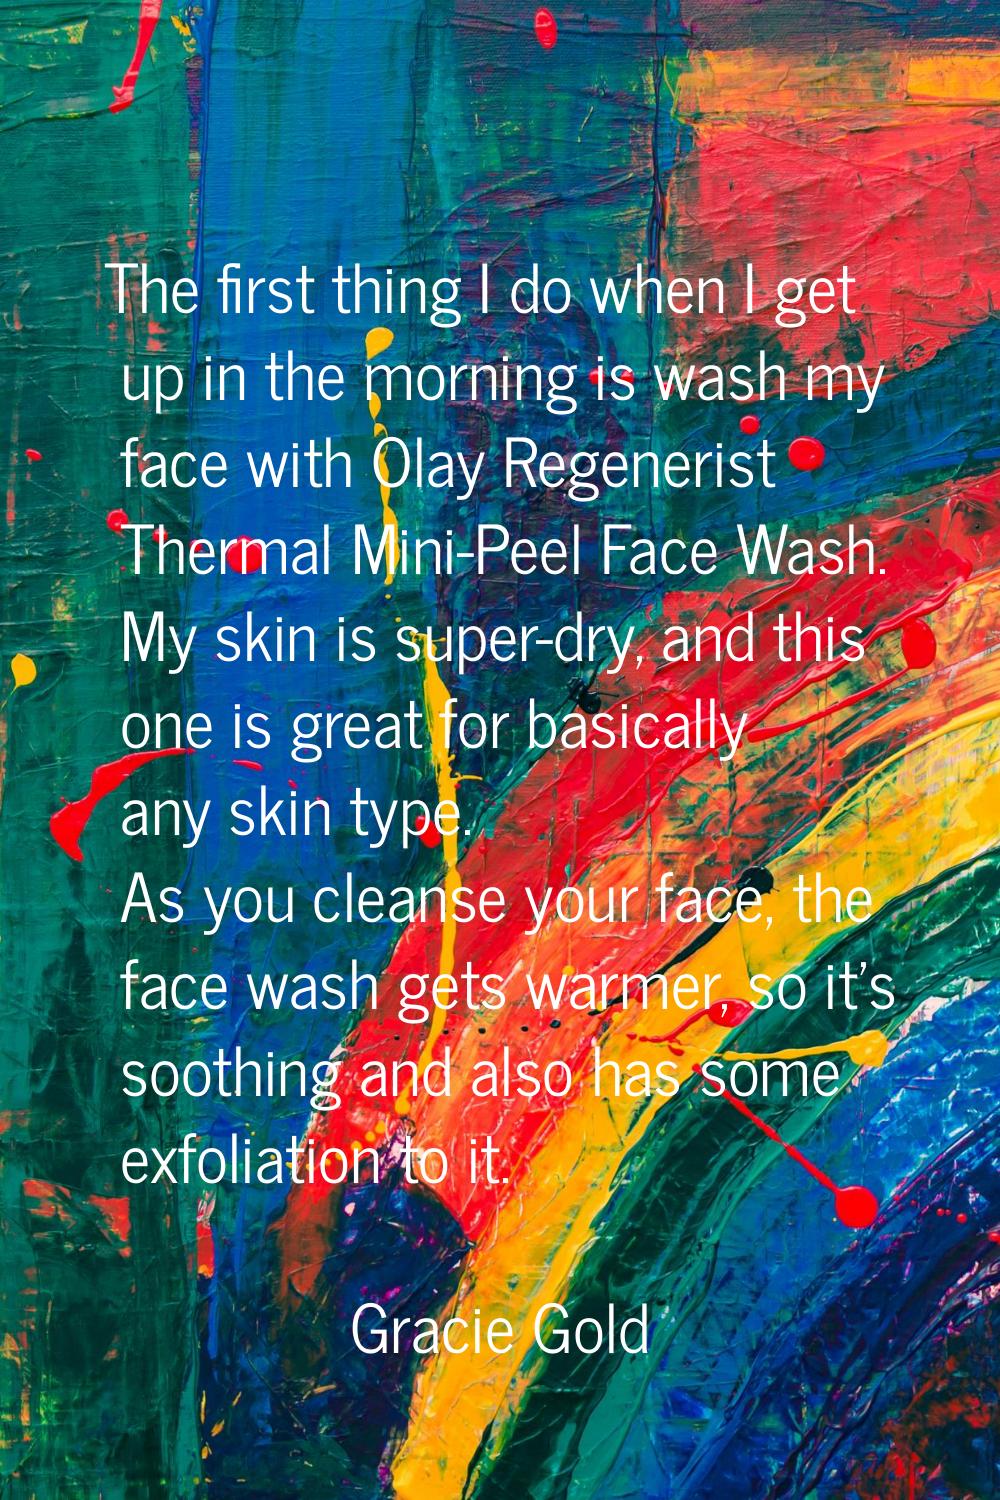 The first thing I do when I get up in the morning is wash my face with Olay Regenerist Thermal Mini